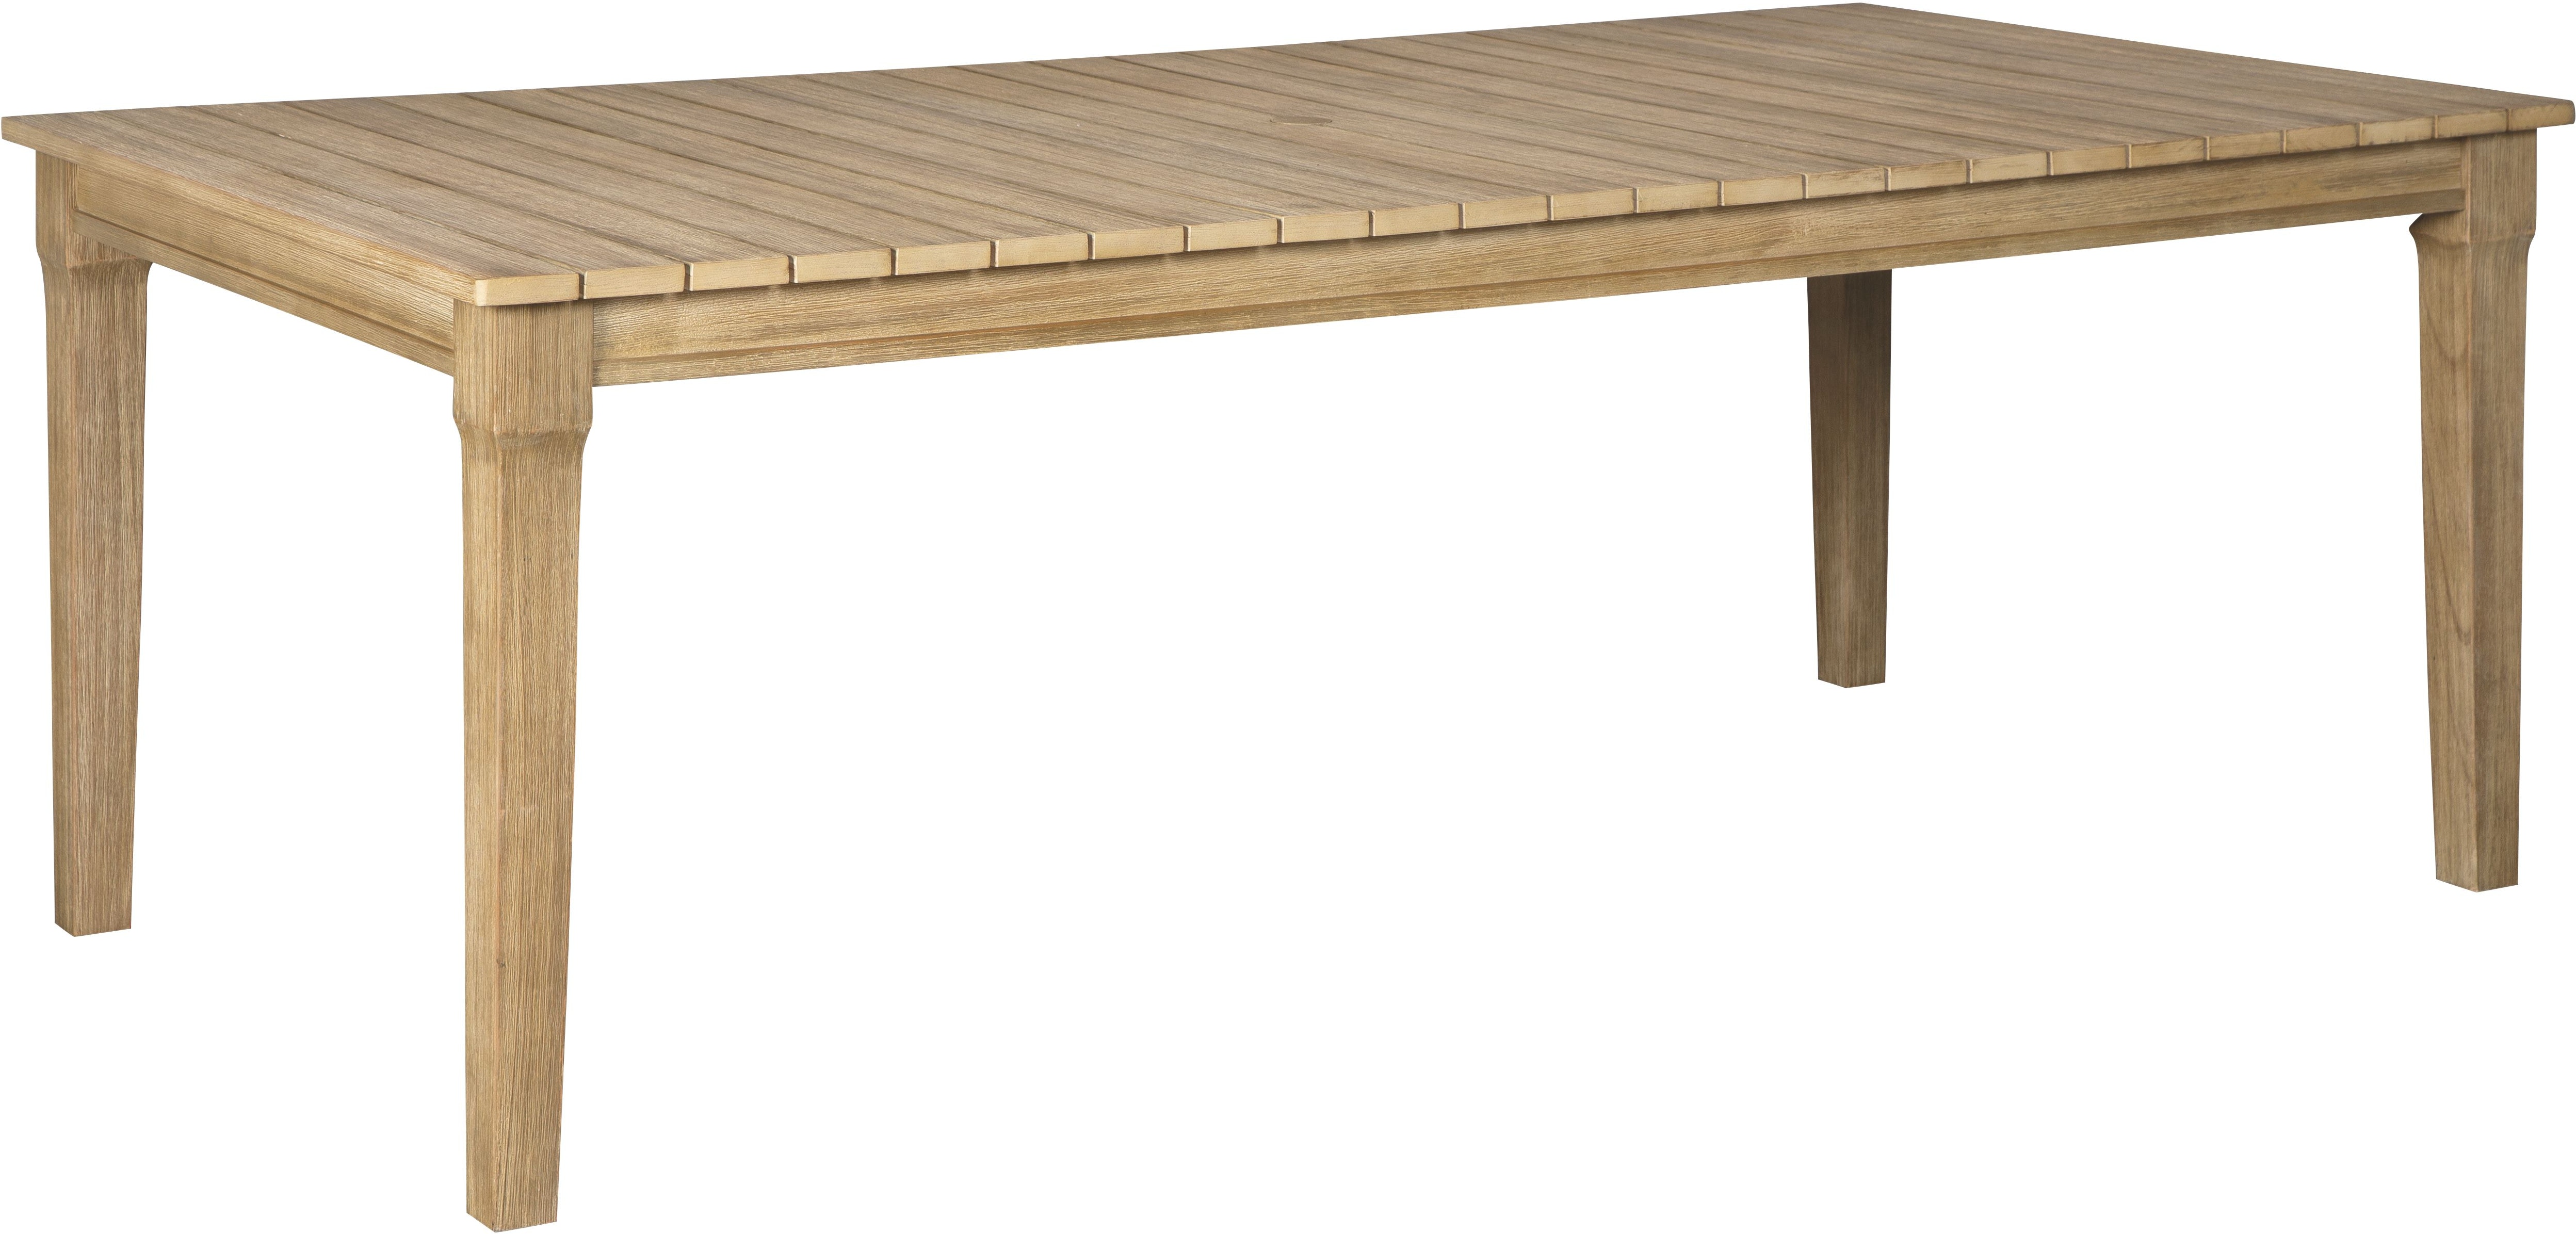 Signature Design by Ashley Outdoor/Patio Clare View Dining Table ...